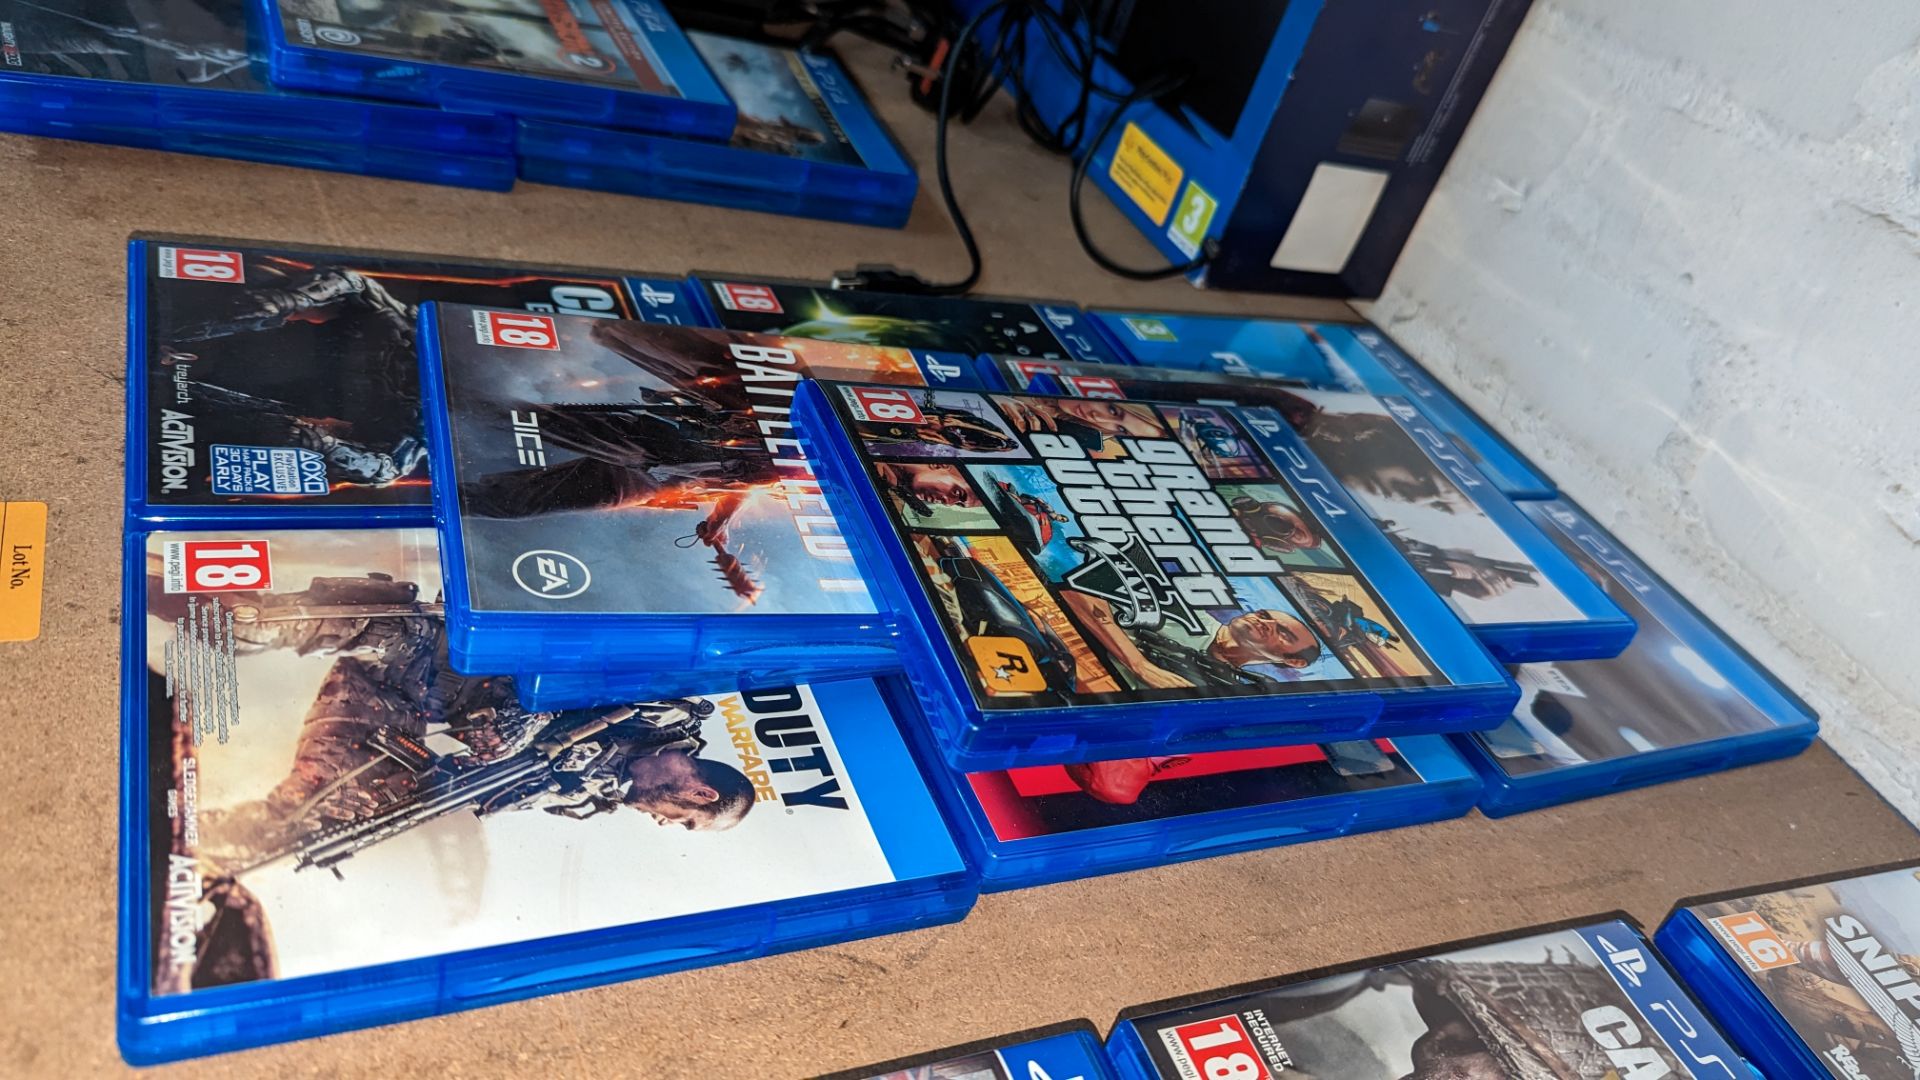 11 off boxed PS4 games as pictured - Image 7 of 10